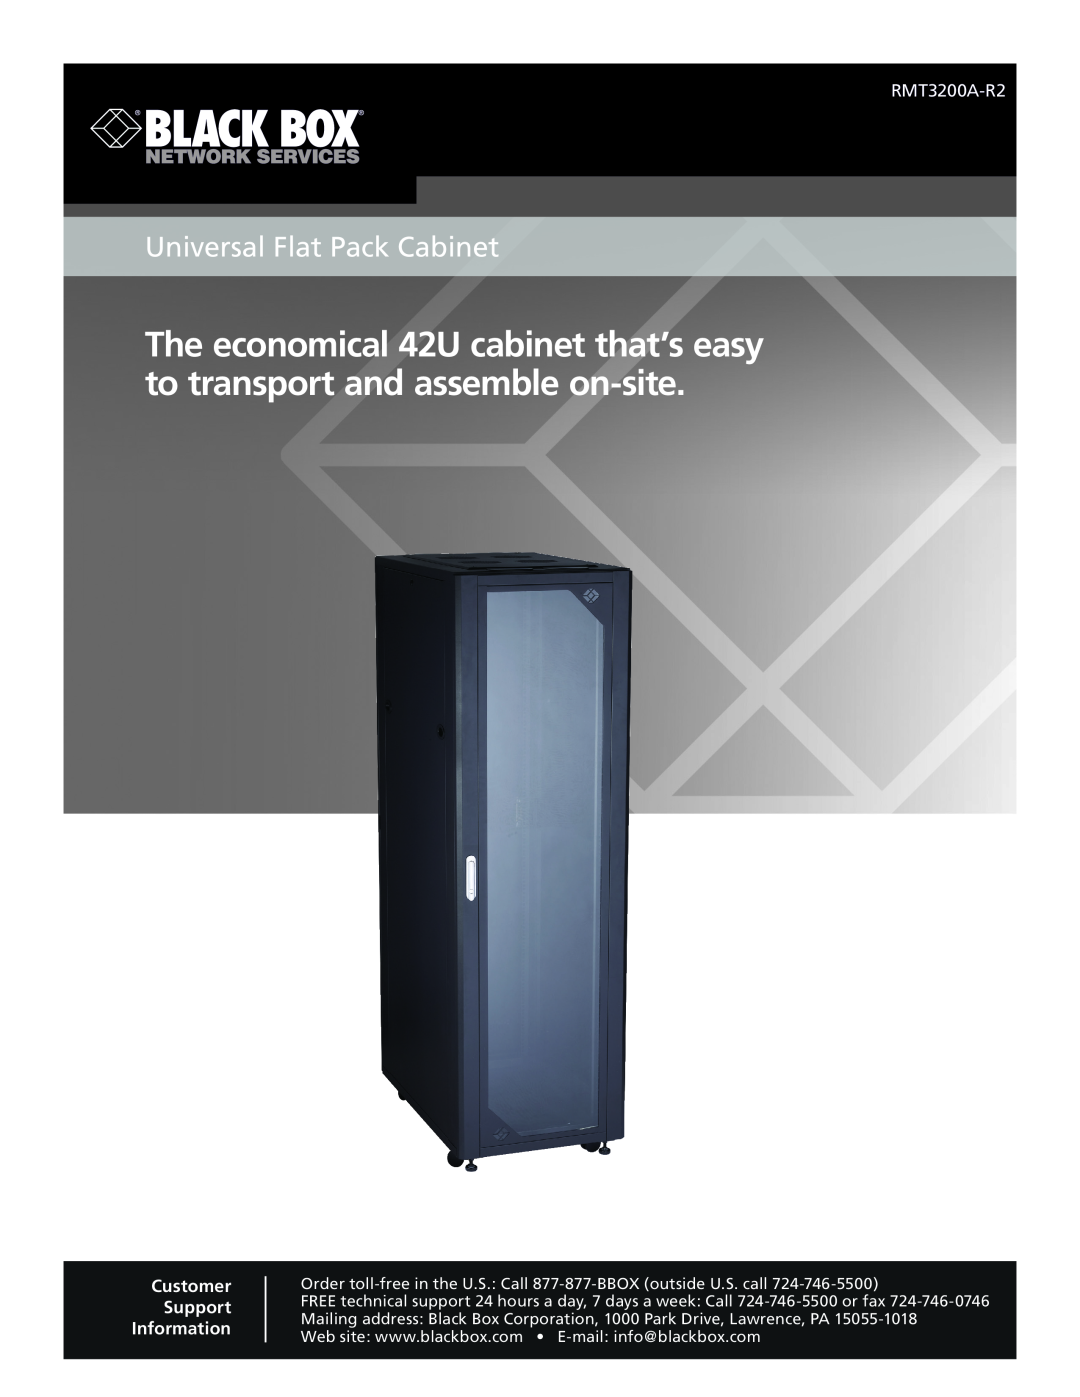 Black Box Universal Flat Pack Cabinet manual RMT3200A-R2, Customer Support Information 